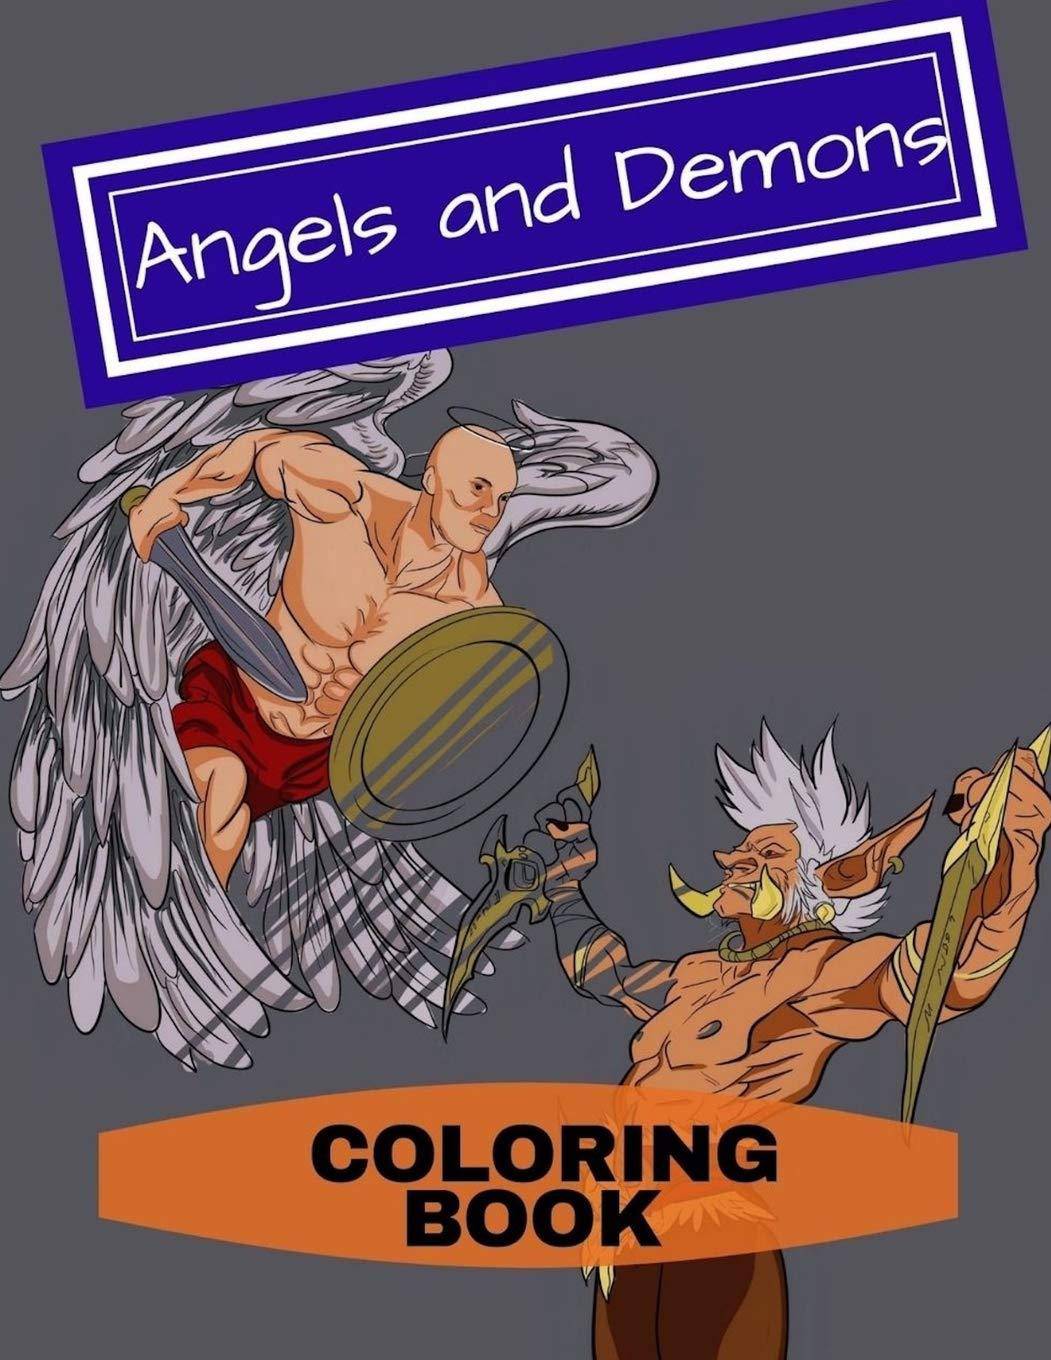 Angels and Demons Coloring Book: Adult Coloring Fun, Stress Reli - SureShot Books Publishing LLC